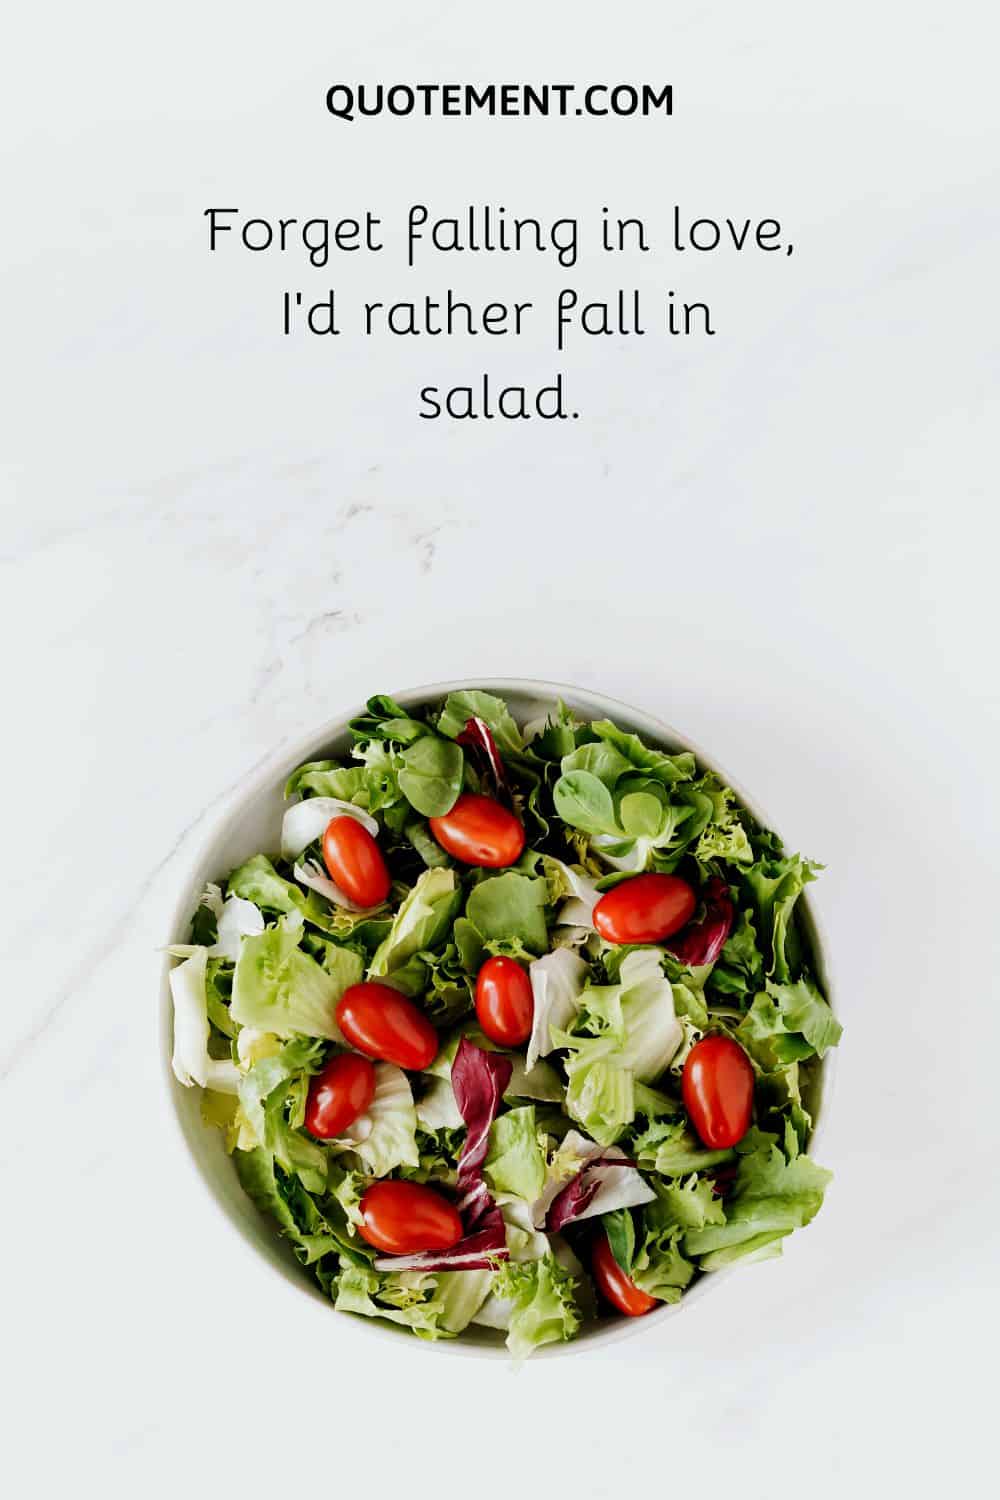 Forget falling in love, I’d rather fall in salad